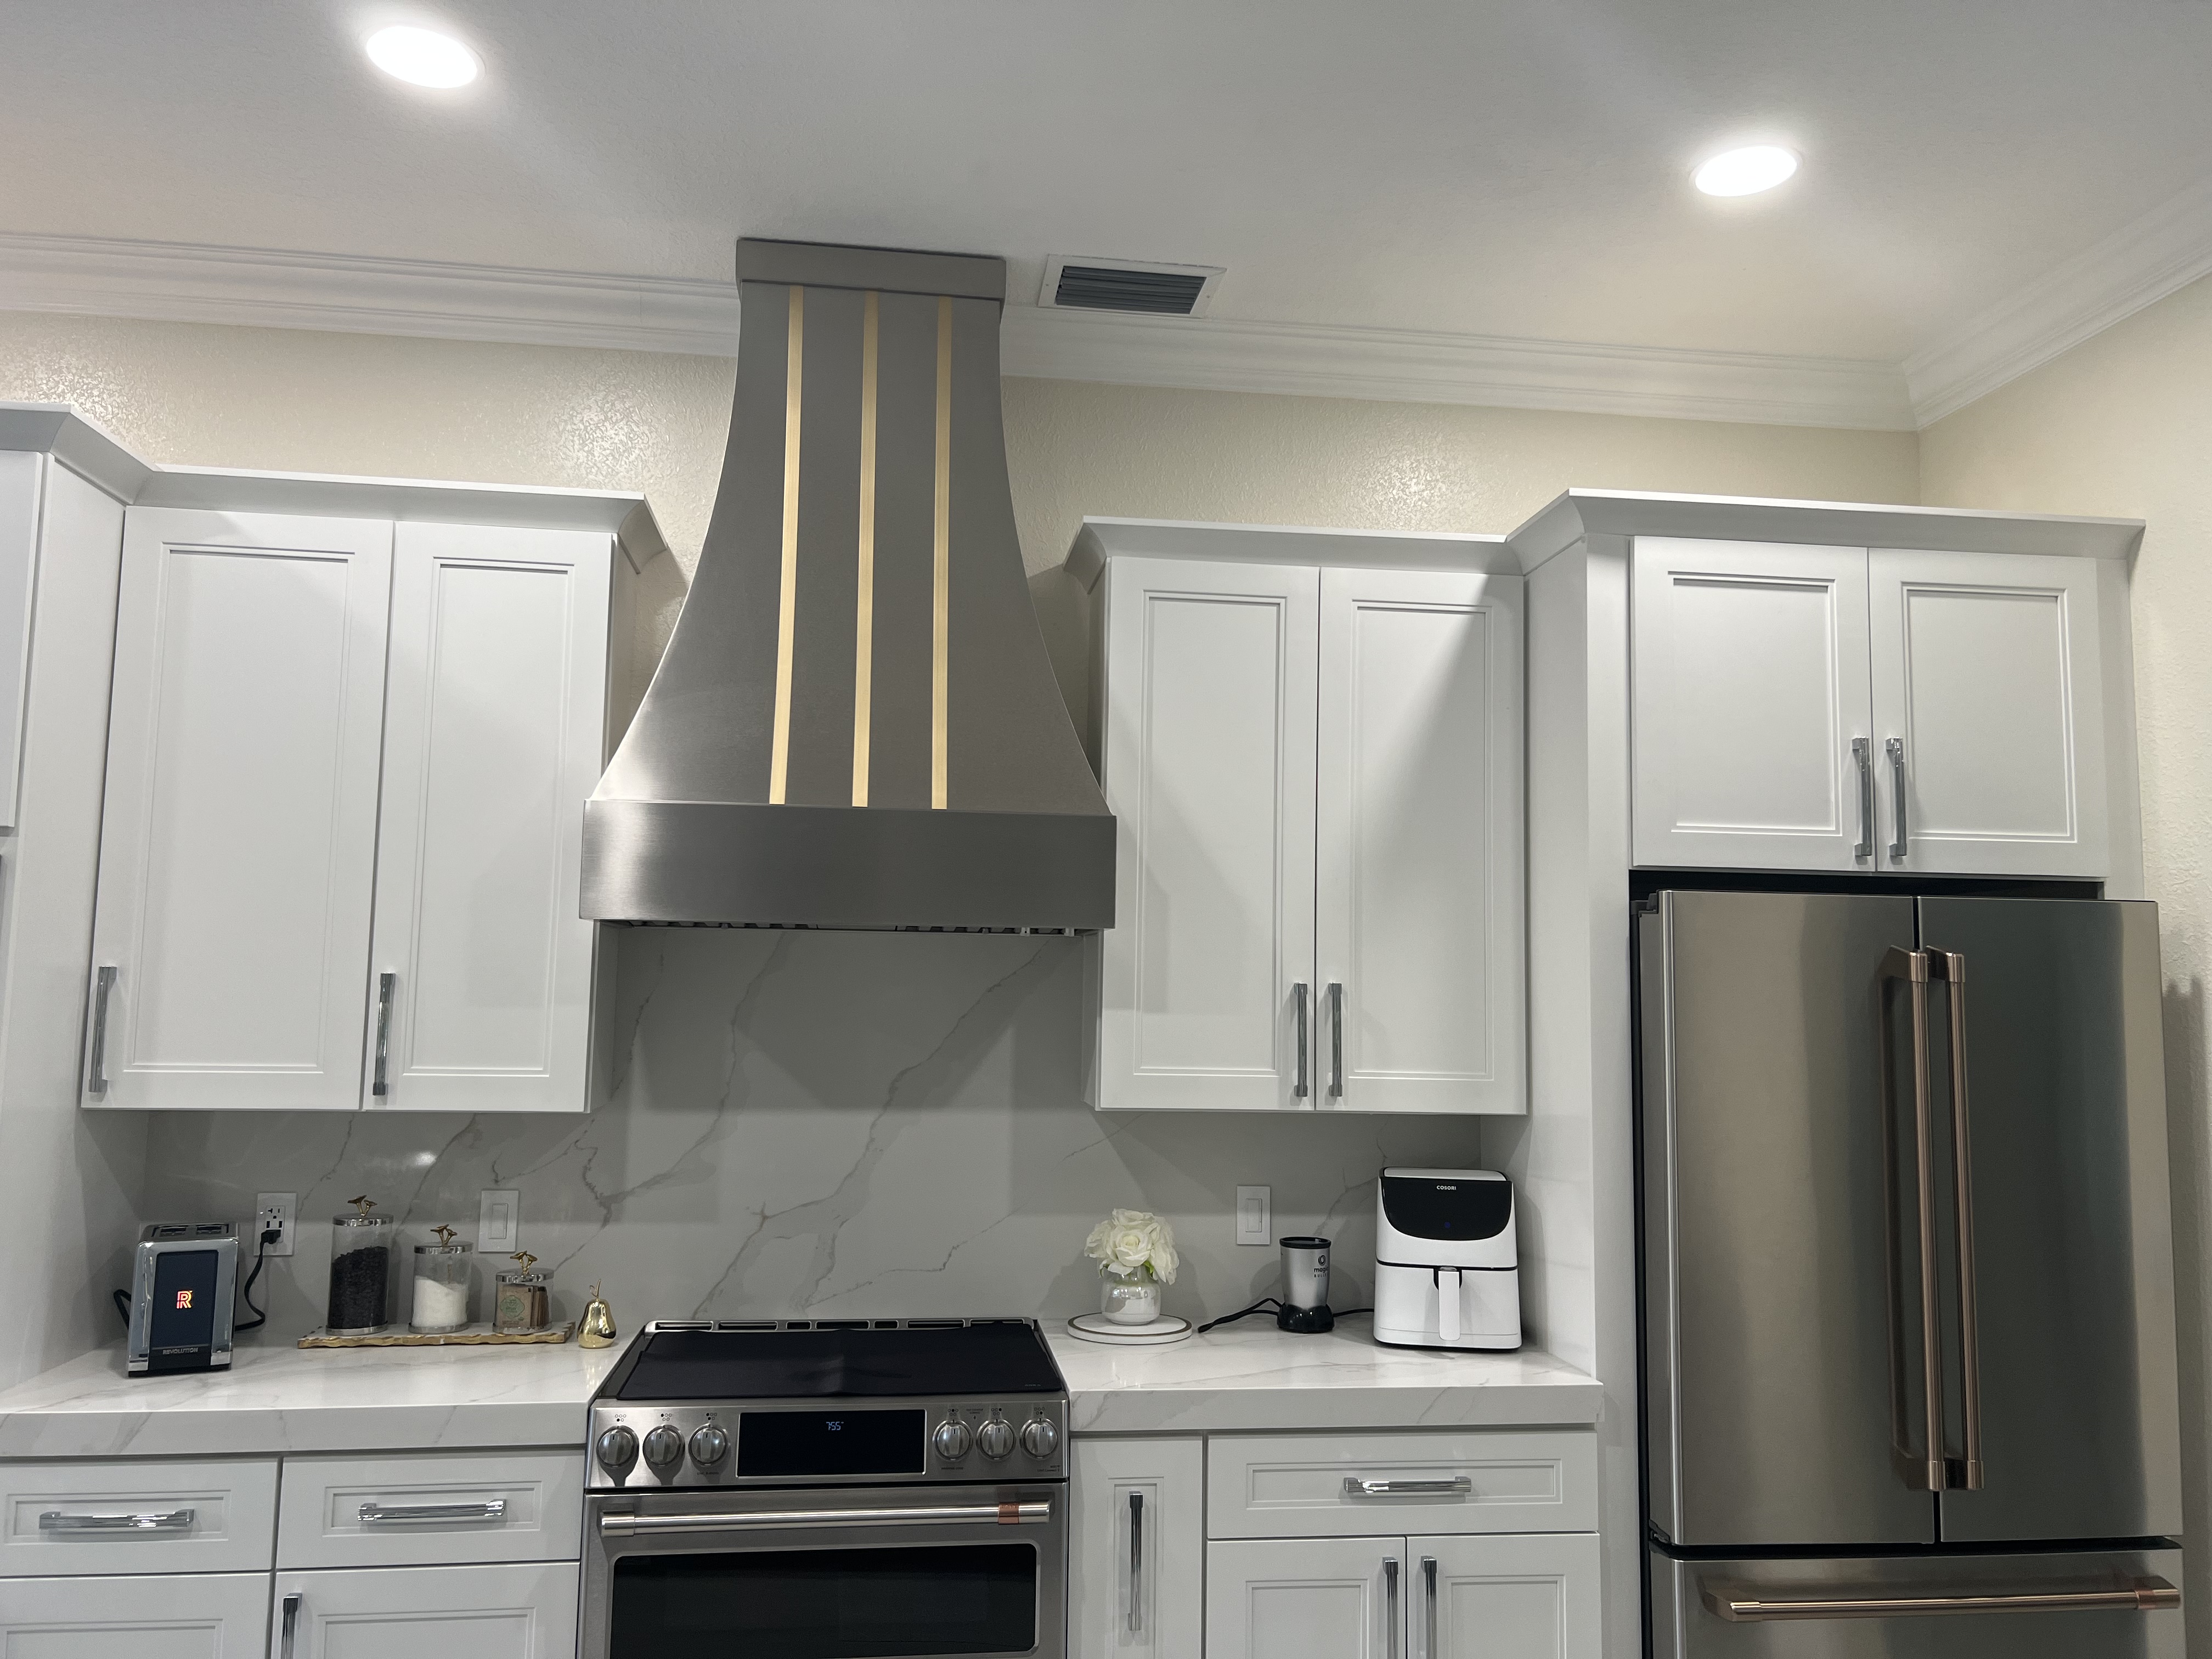 Sleek Stainless Steel "Charlotte" Hood with Brass Straps